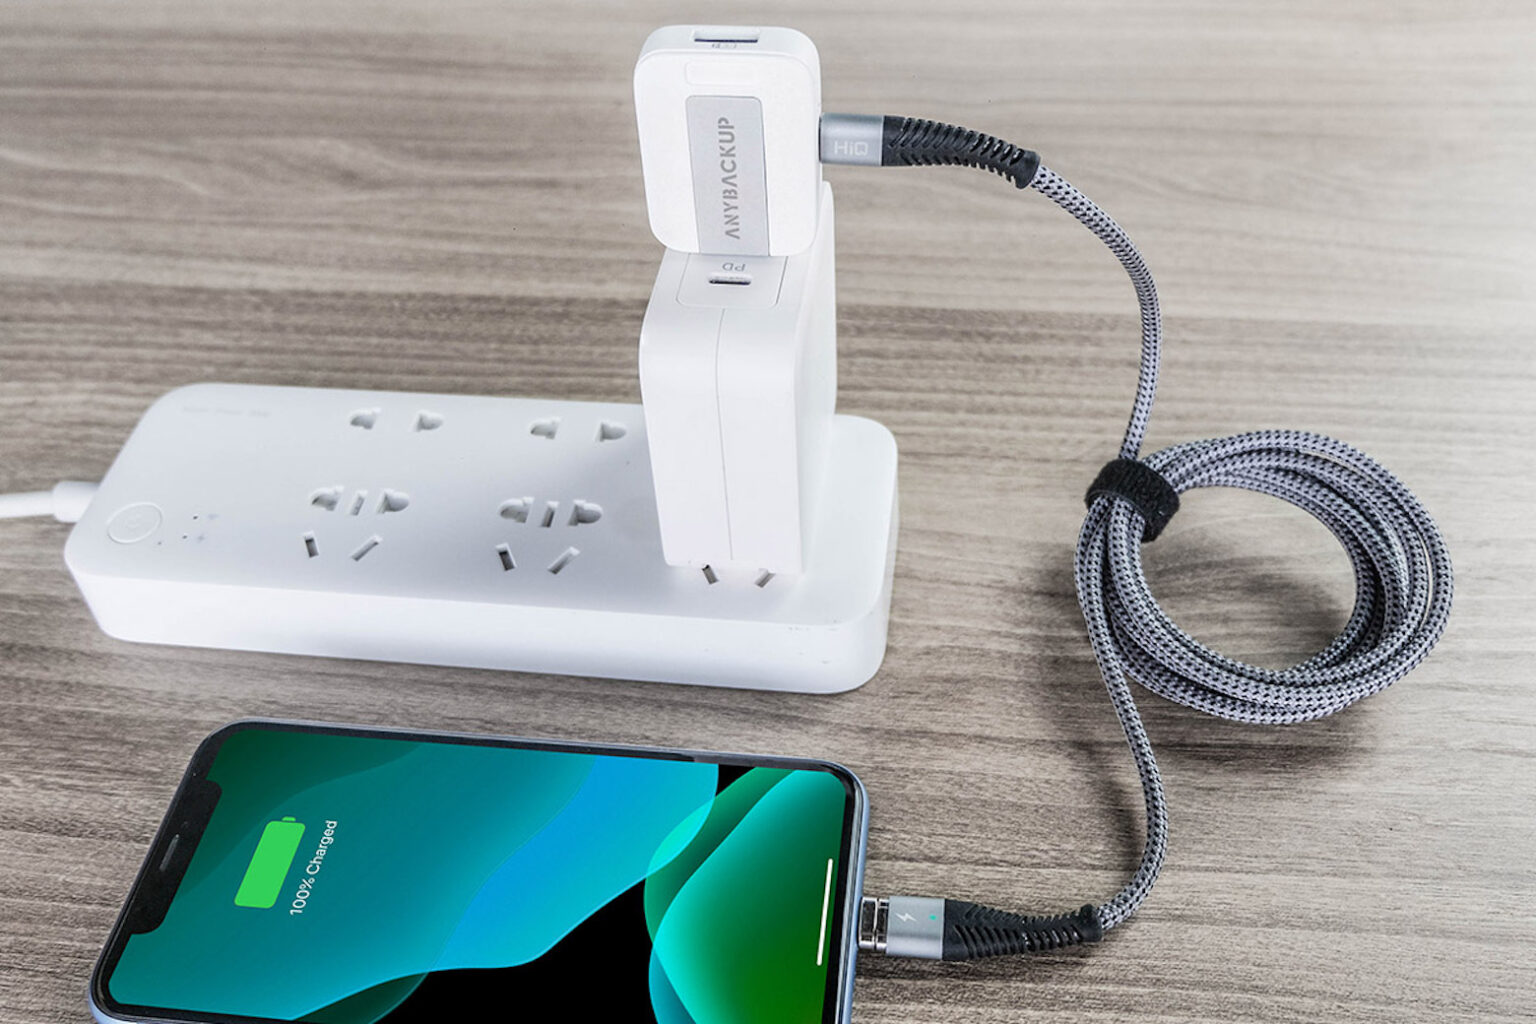 backup your device anywhere, with no internet connection needed.